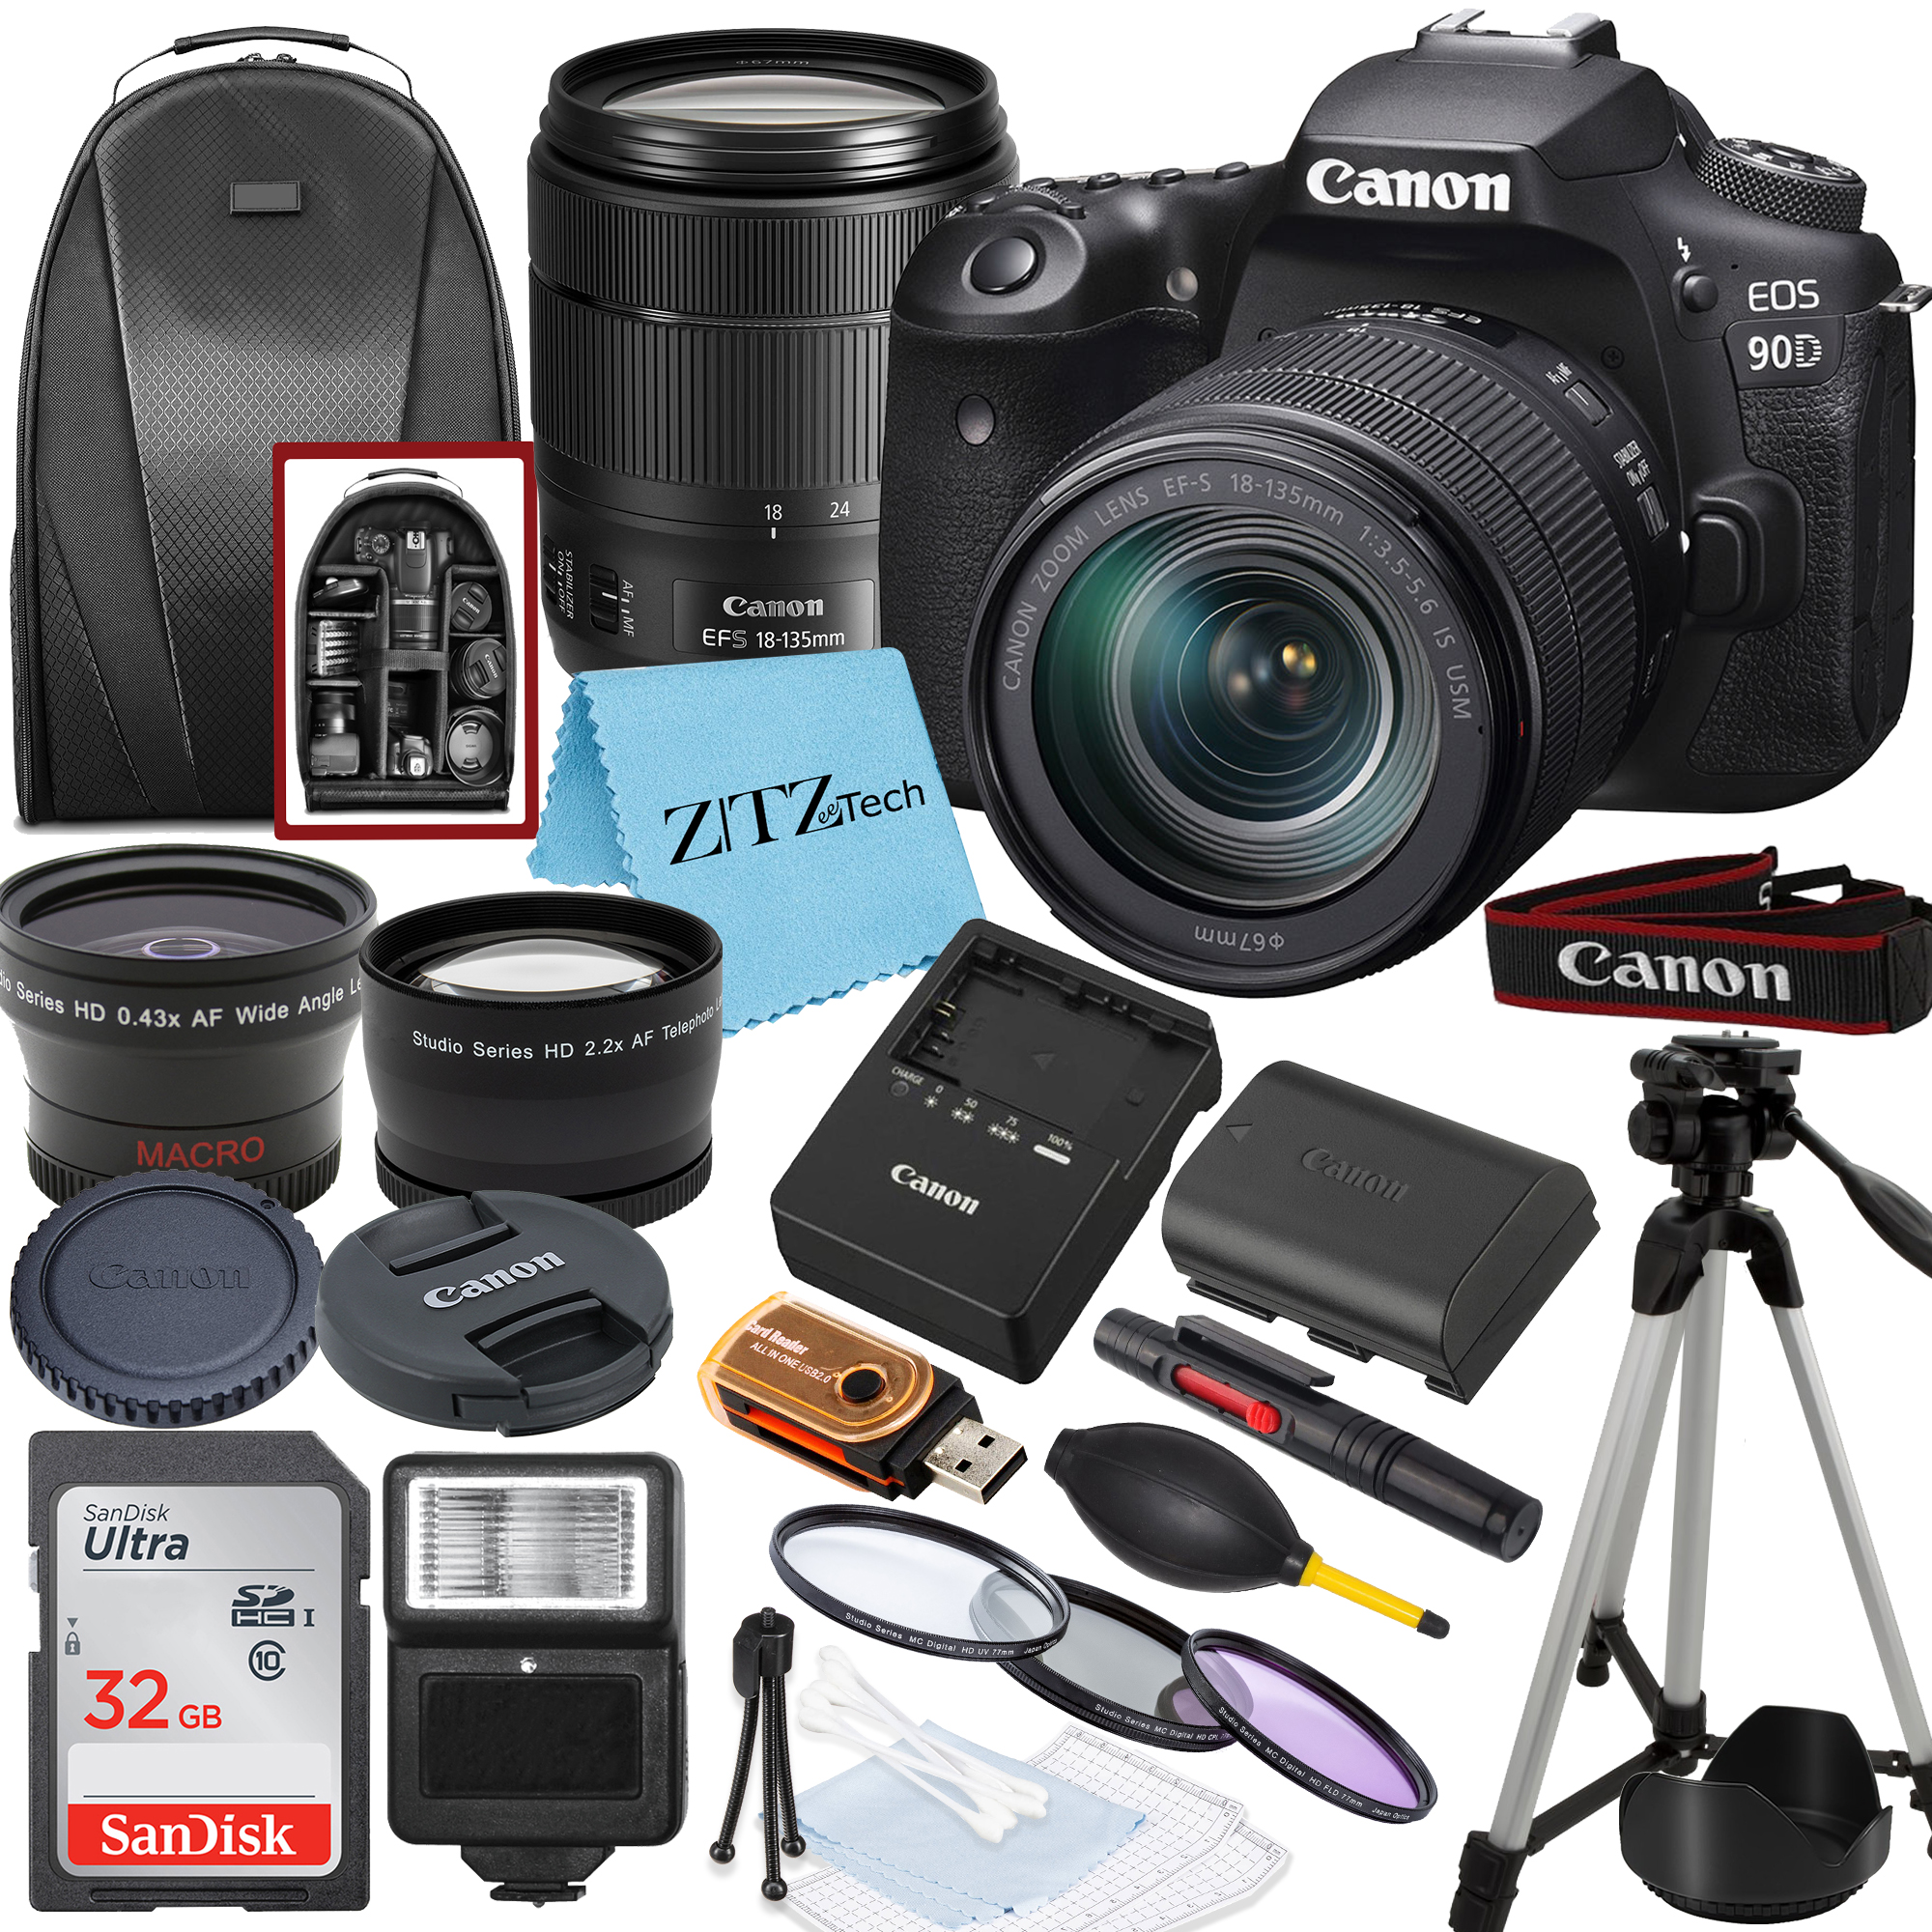 Canon EOS 90D DSLR Camera with 18-135mm Lens, SanDisk 32GB Memory Card, Backpack, Flash, Tripod and ZeeTech Accessory Bundle